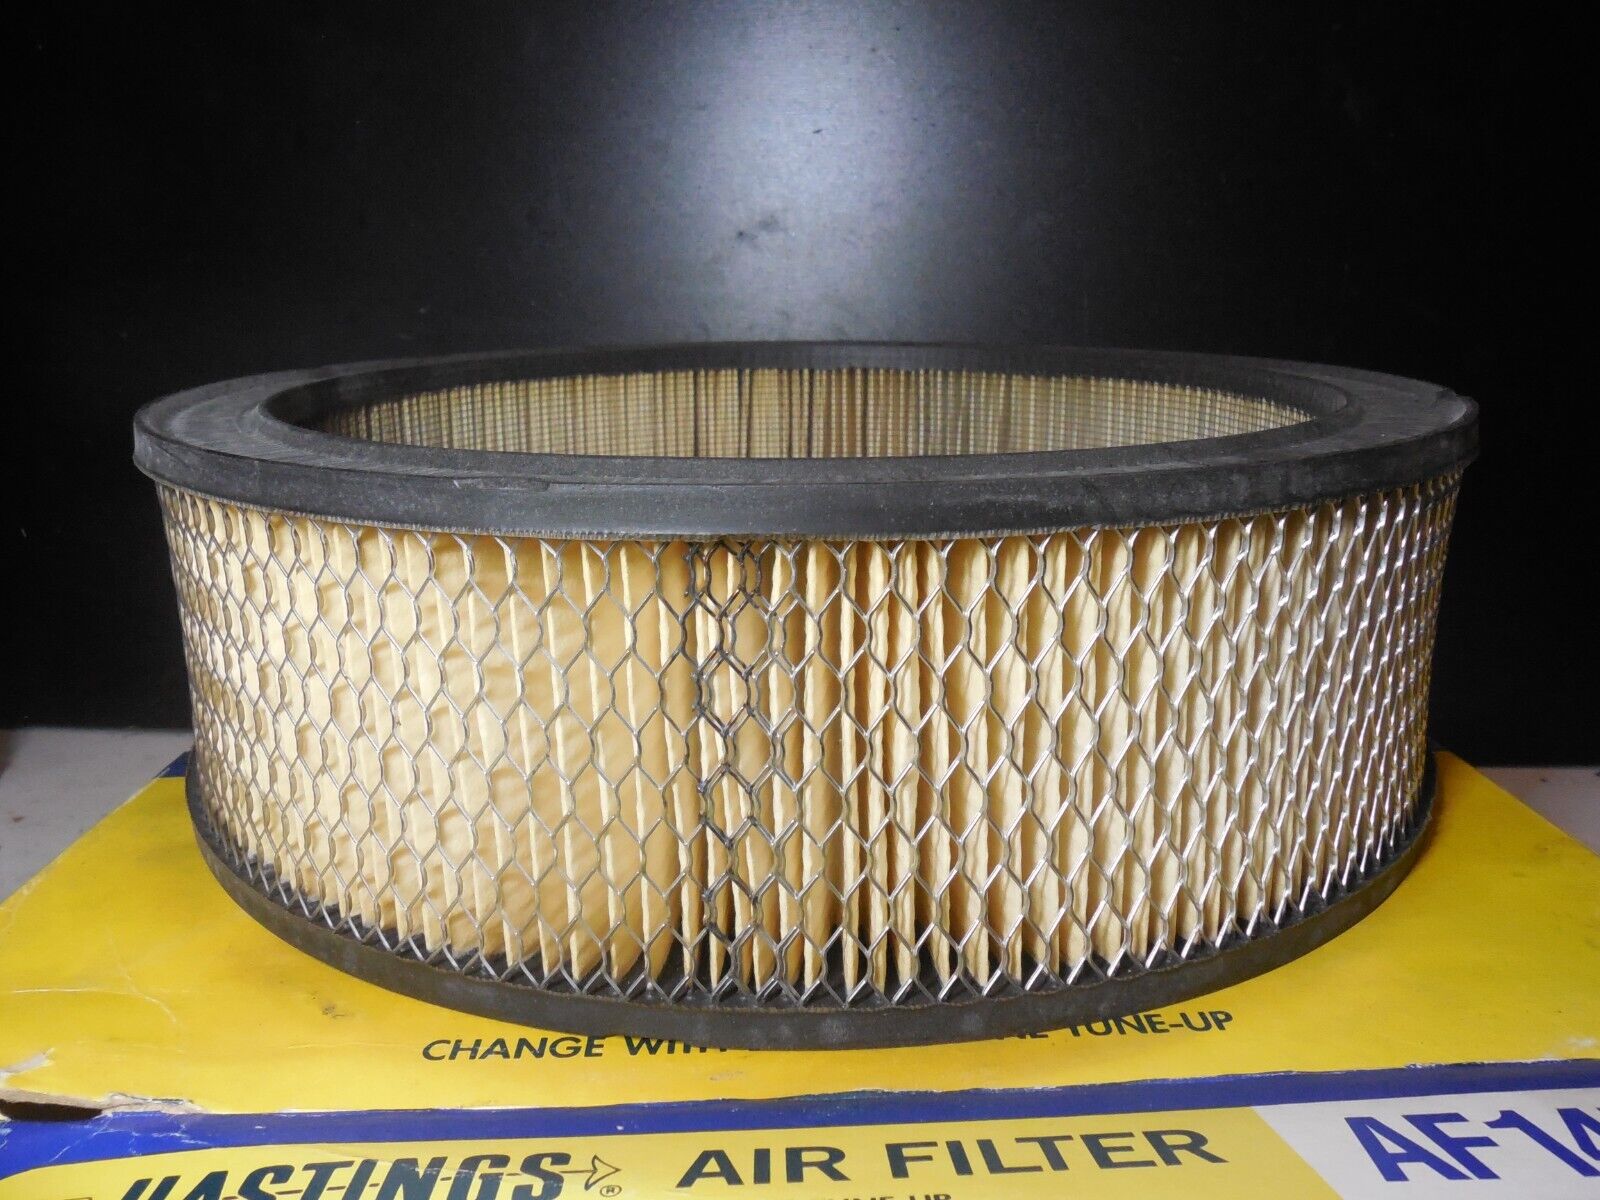 Hastings AF145 Air Filter For Avanti II, Buick Apollo, Cadillac Brougham